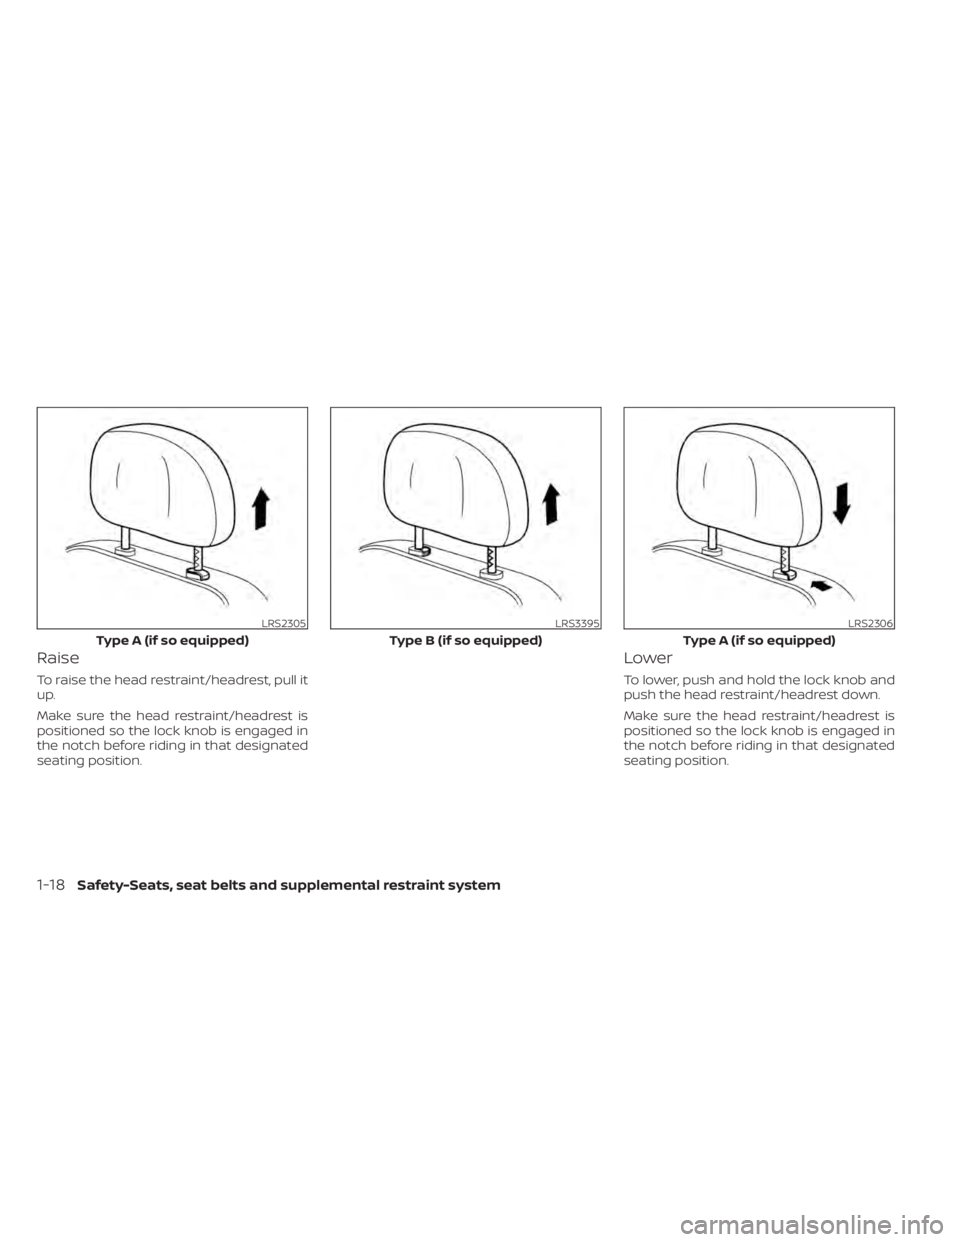 NISSAN PATHFINDER 2023 Service Manual Raise
To raise the head restraint/headrest, pull it
up.
Make sure the head restraint/headrest is
positioned so the lock knob is engaged in
the notch before riding in that designated
seating position.
